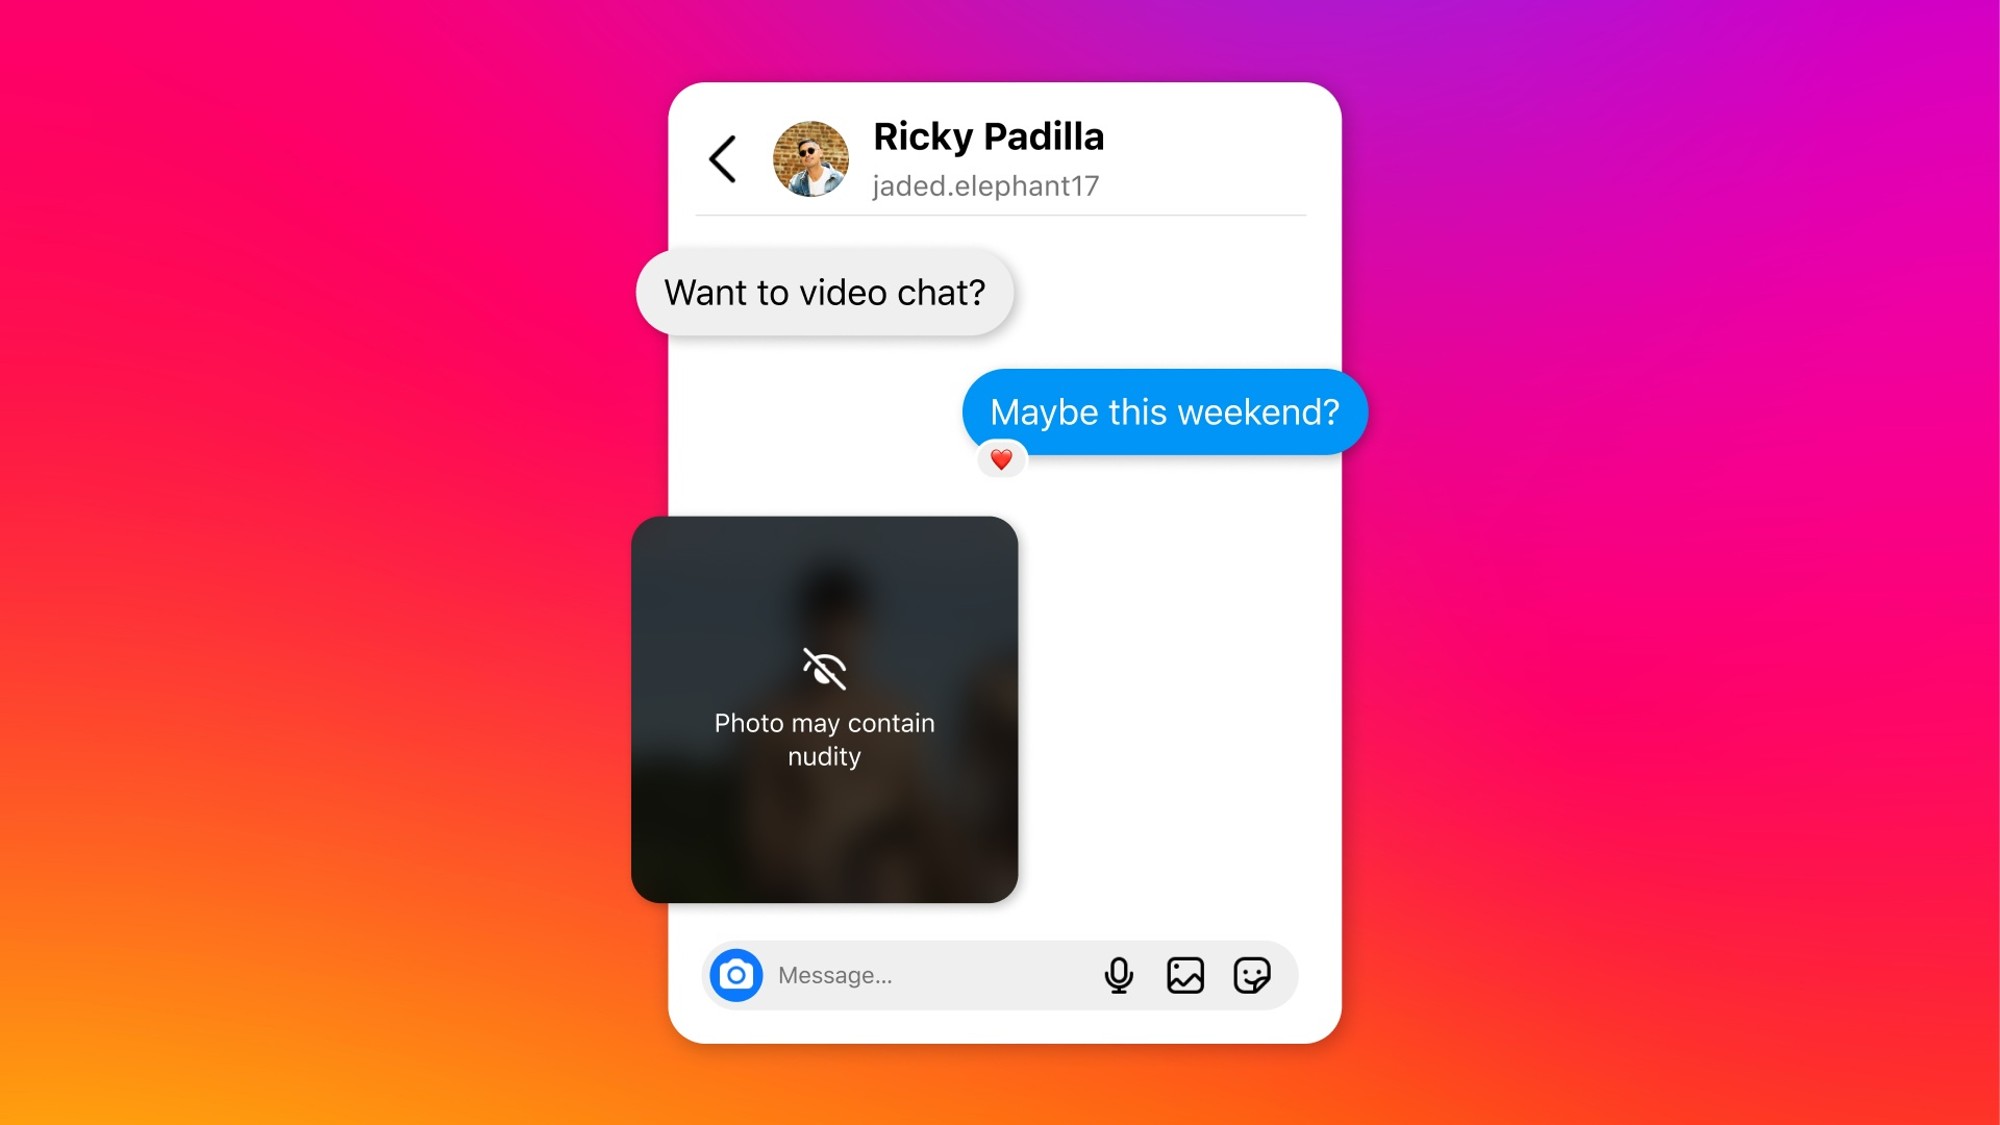  Instagram hopes that blurring nudity in messages will make teens safer  